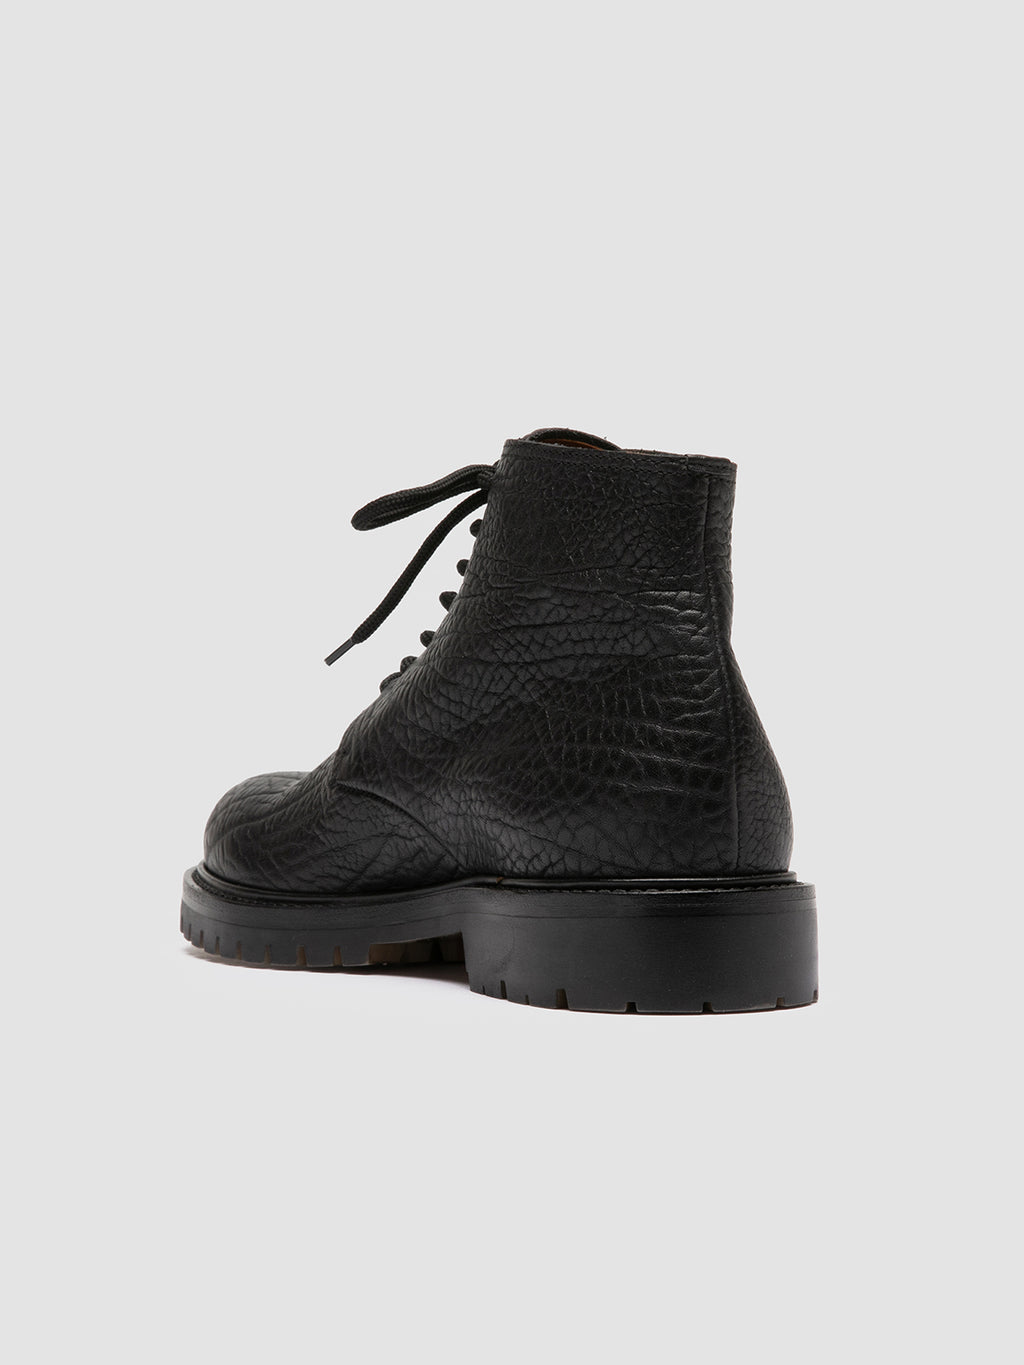 BOSS 011 - Black Leather Lace-up Boots Men Officine Creative - 4